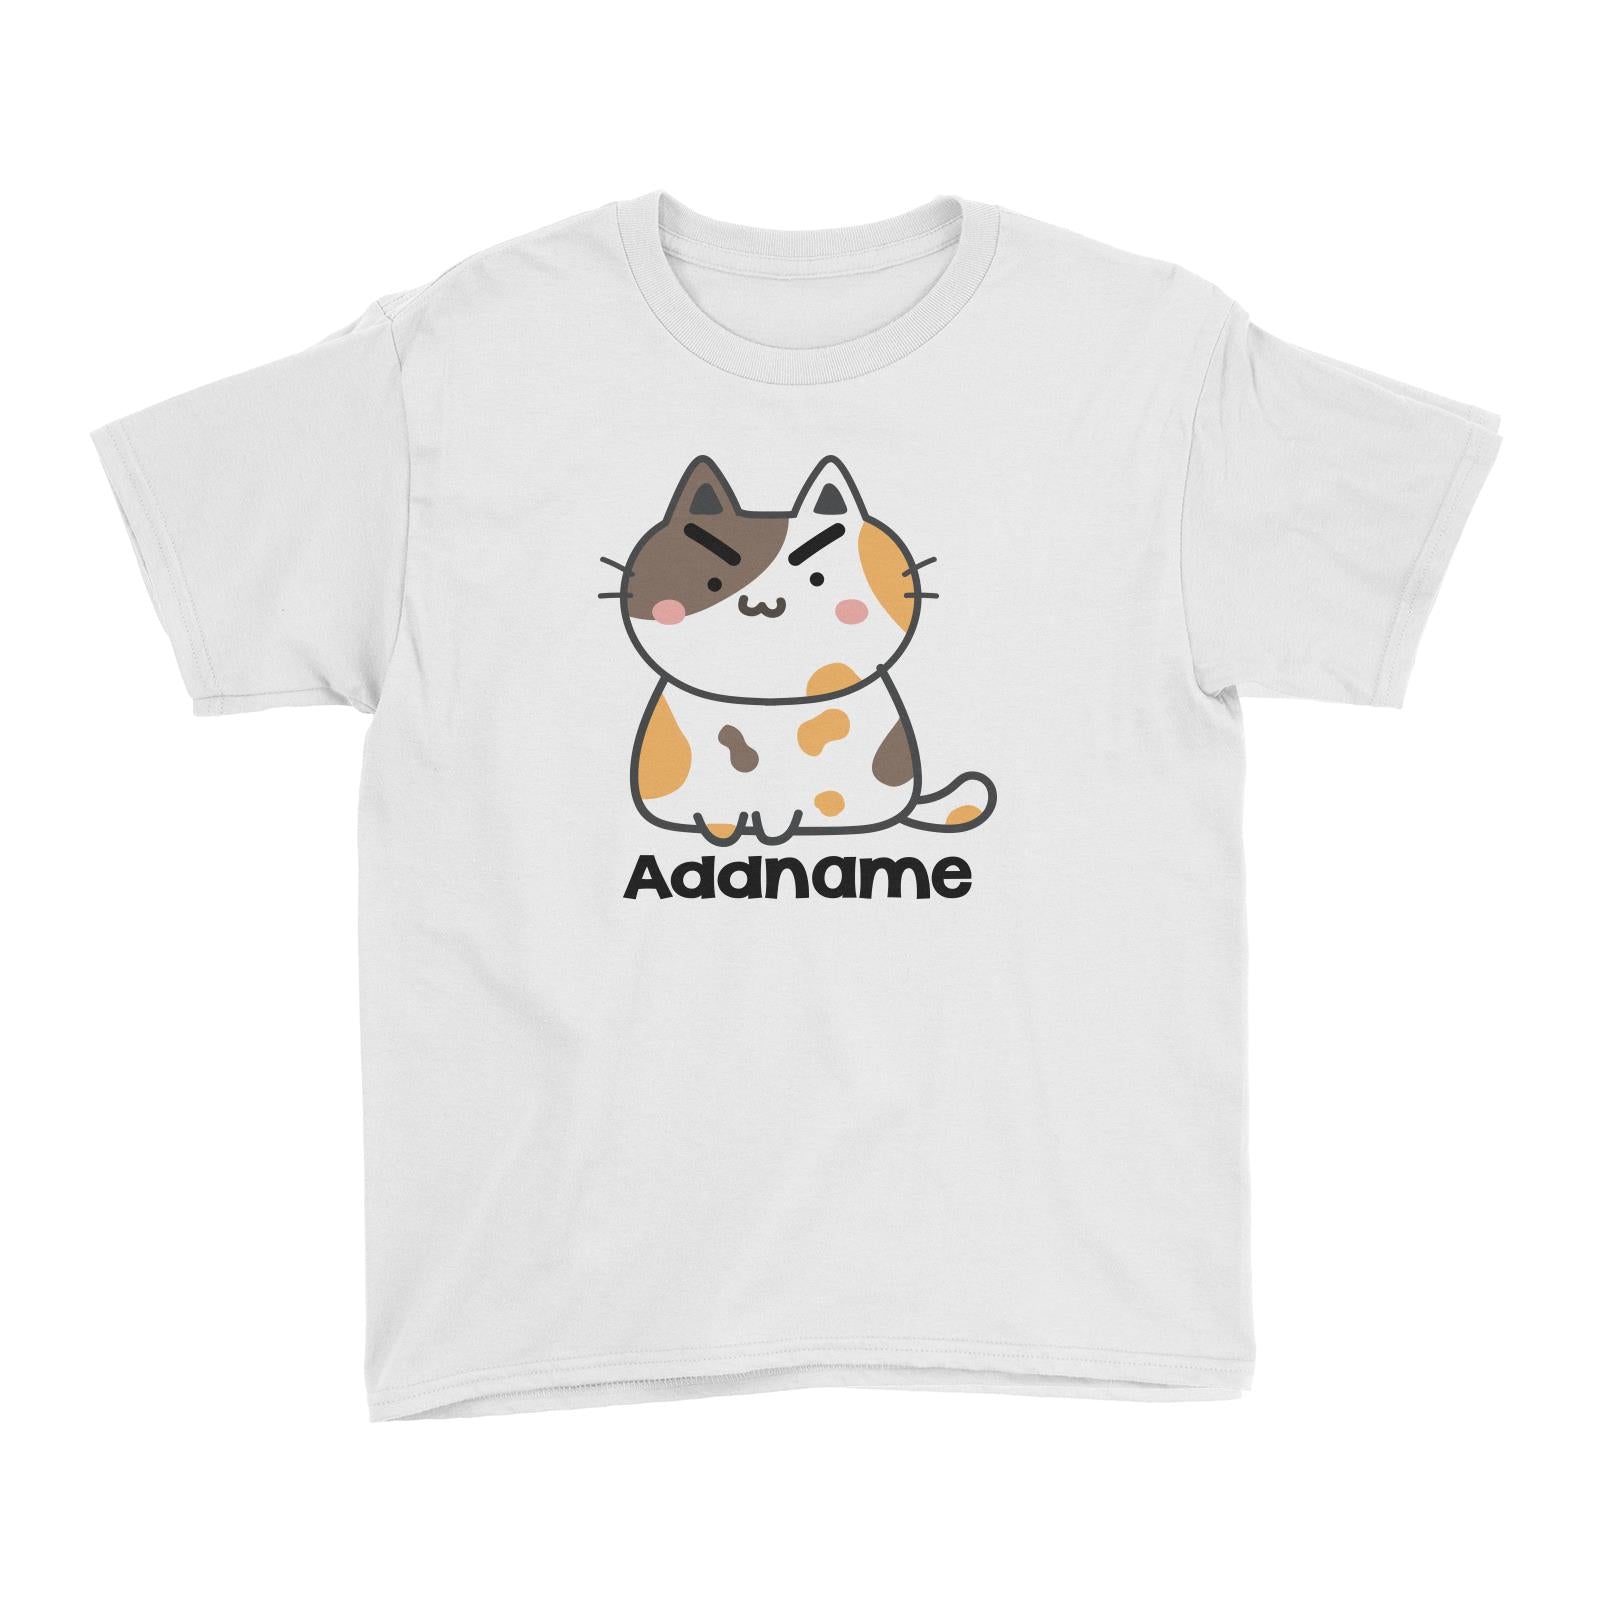 Drawn Adorable Cats Angry Cat Addname Kid's T-Shirt